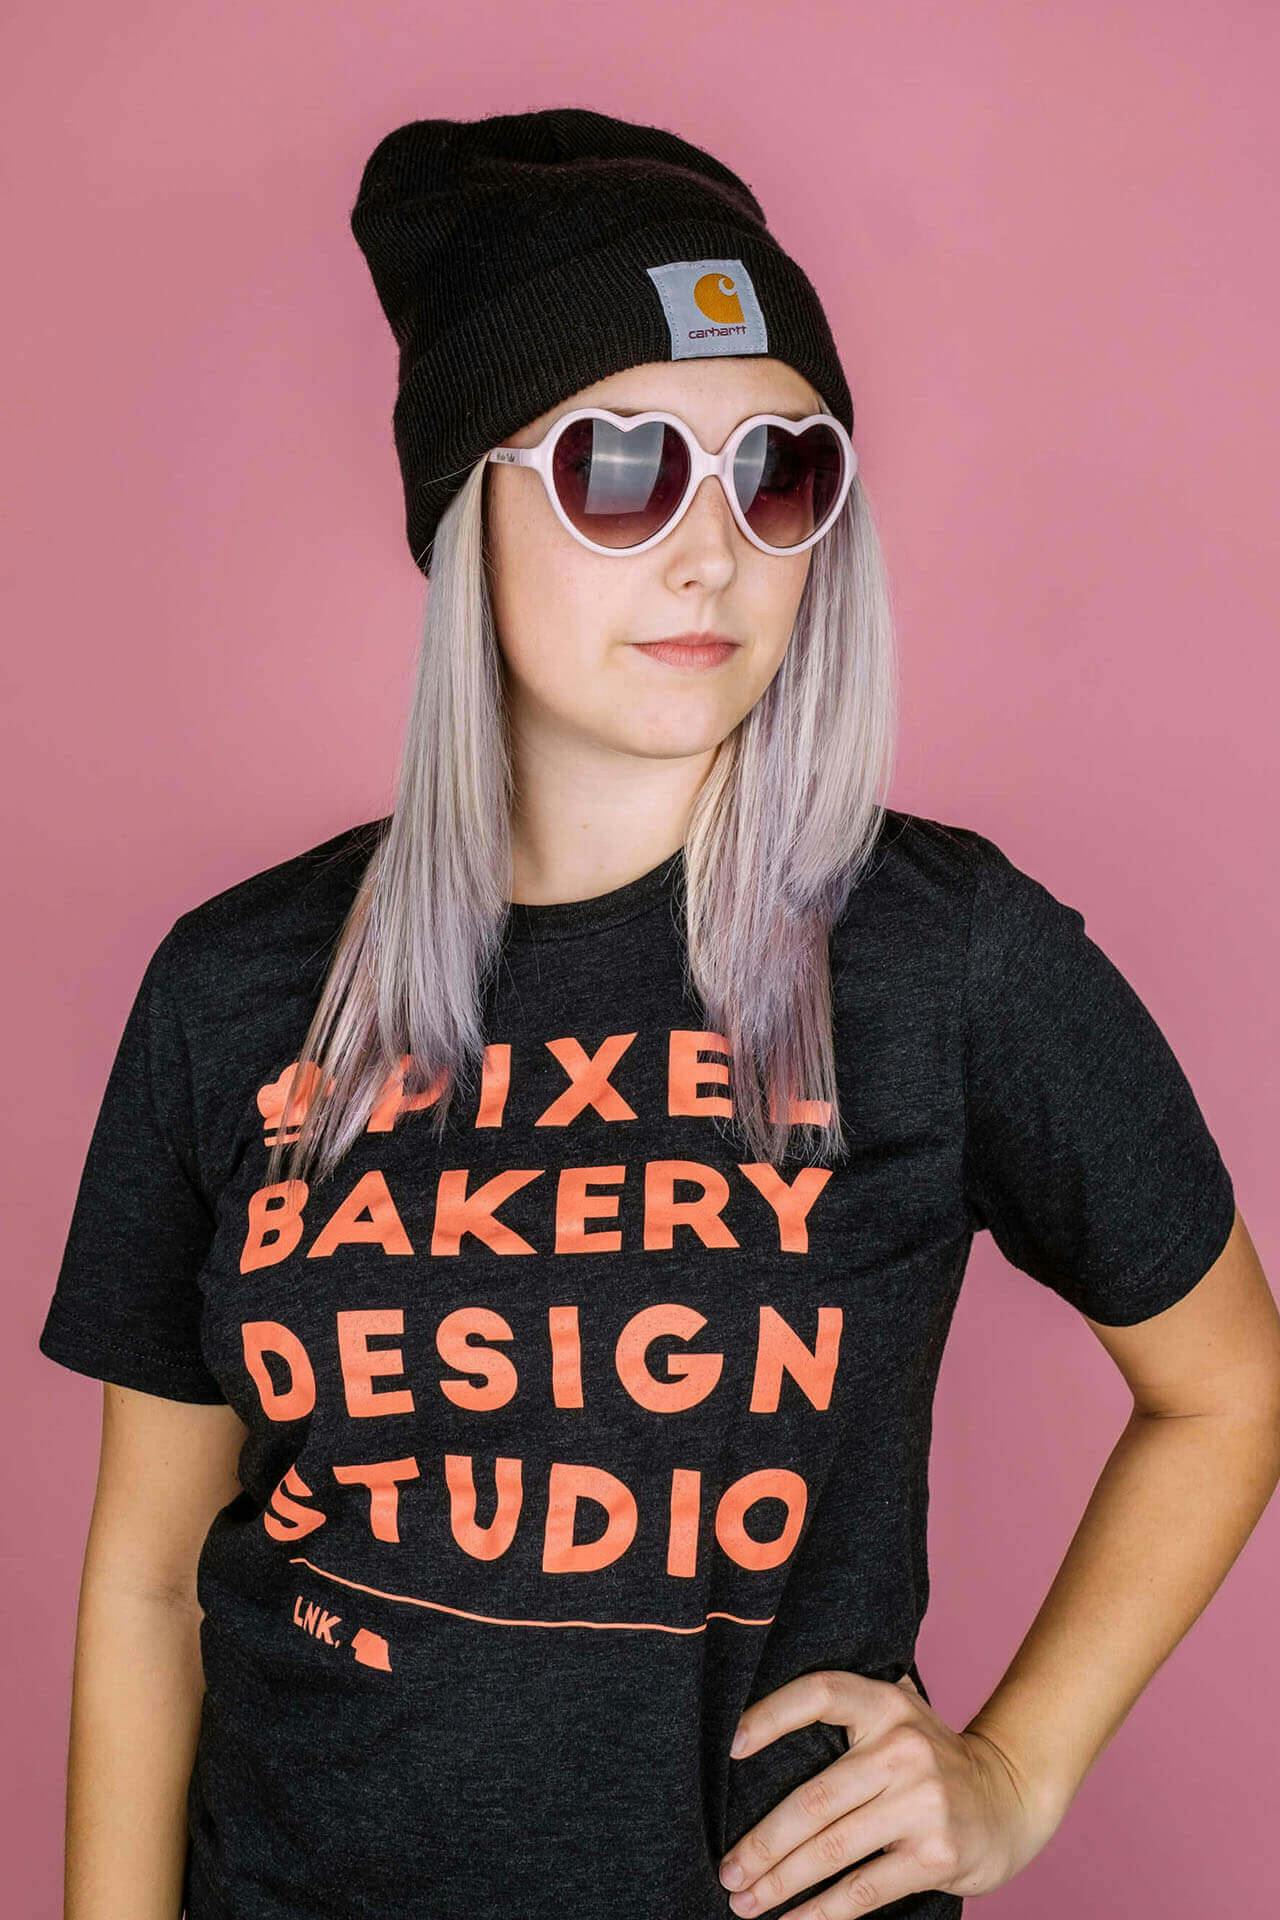 Karley Johnson was a Co-Founder at Pixel Bakery Design Studio